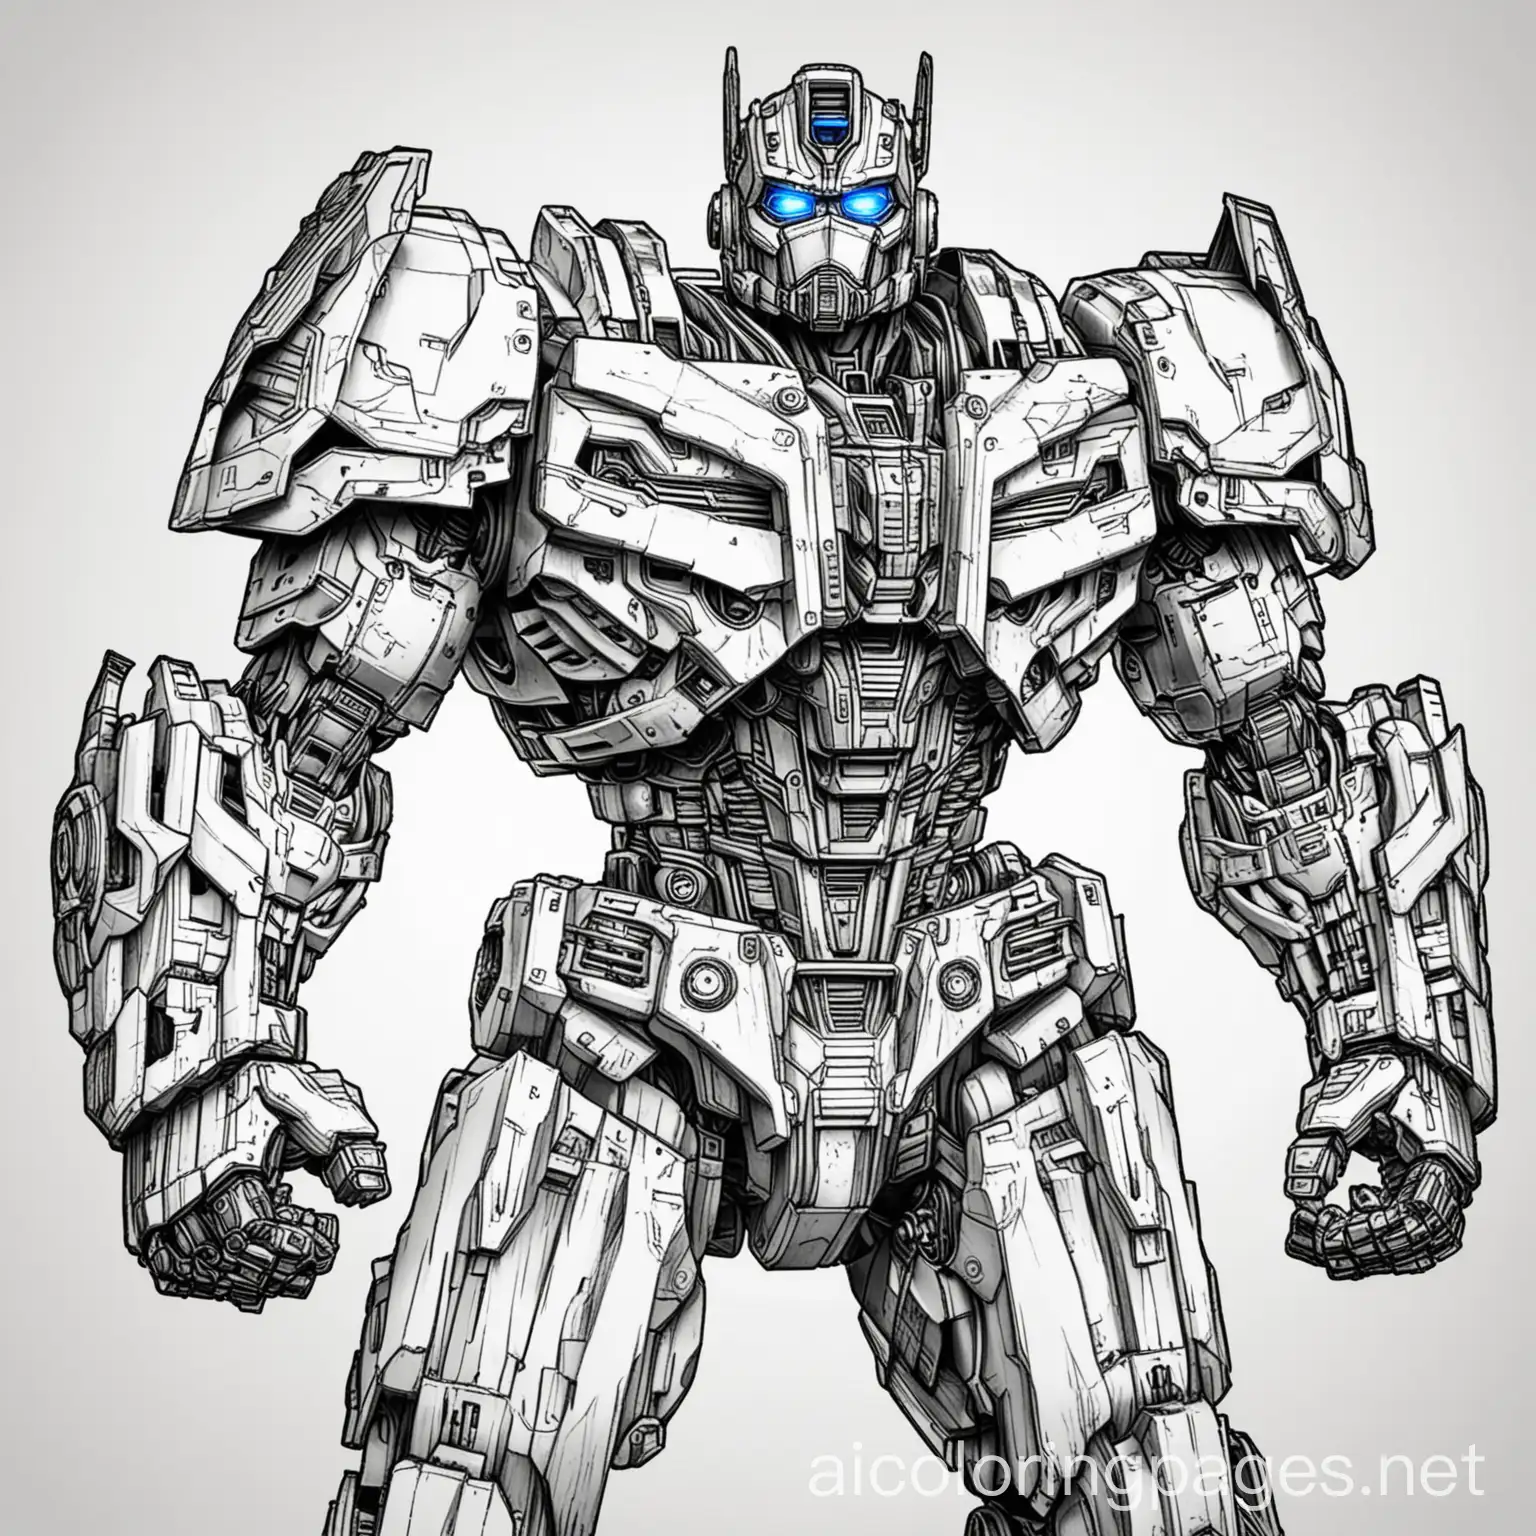 "Transformers Coloring Book" with a big image of Optimus Prime and Bumblebee., Coloring Page, black and white, line art, white background, Simplicity, Ample White Space. The background of the coloring page is plain white to make it easy for young children to color within the lines. The outlines of all the subjects are easy to distinguish, making it simple for kids to color without too much difficulty